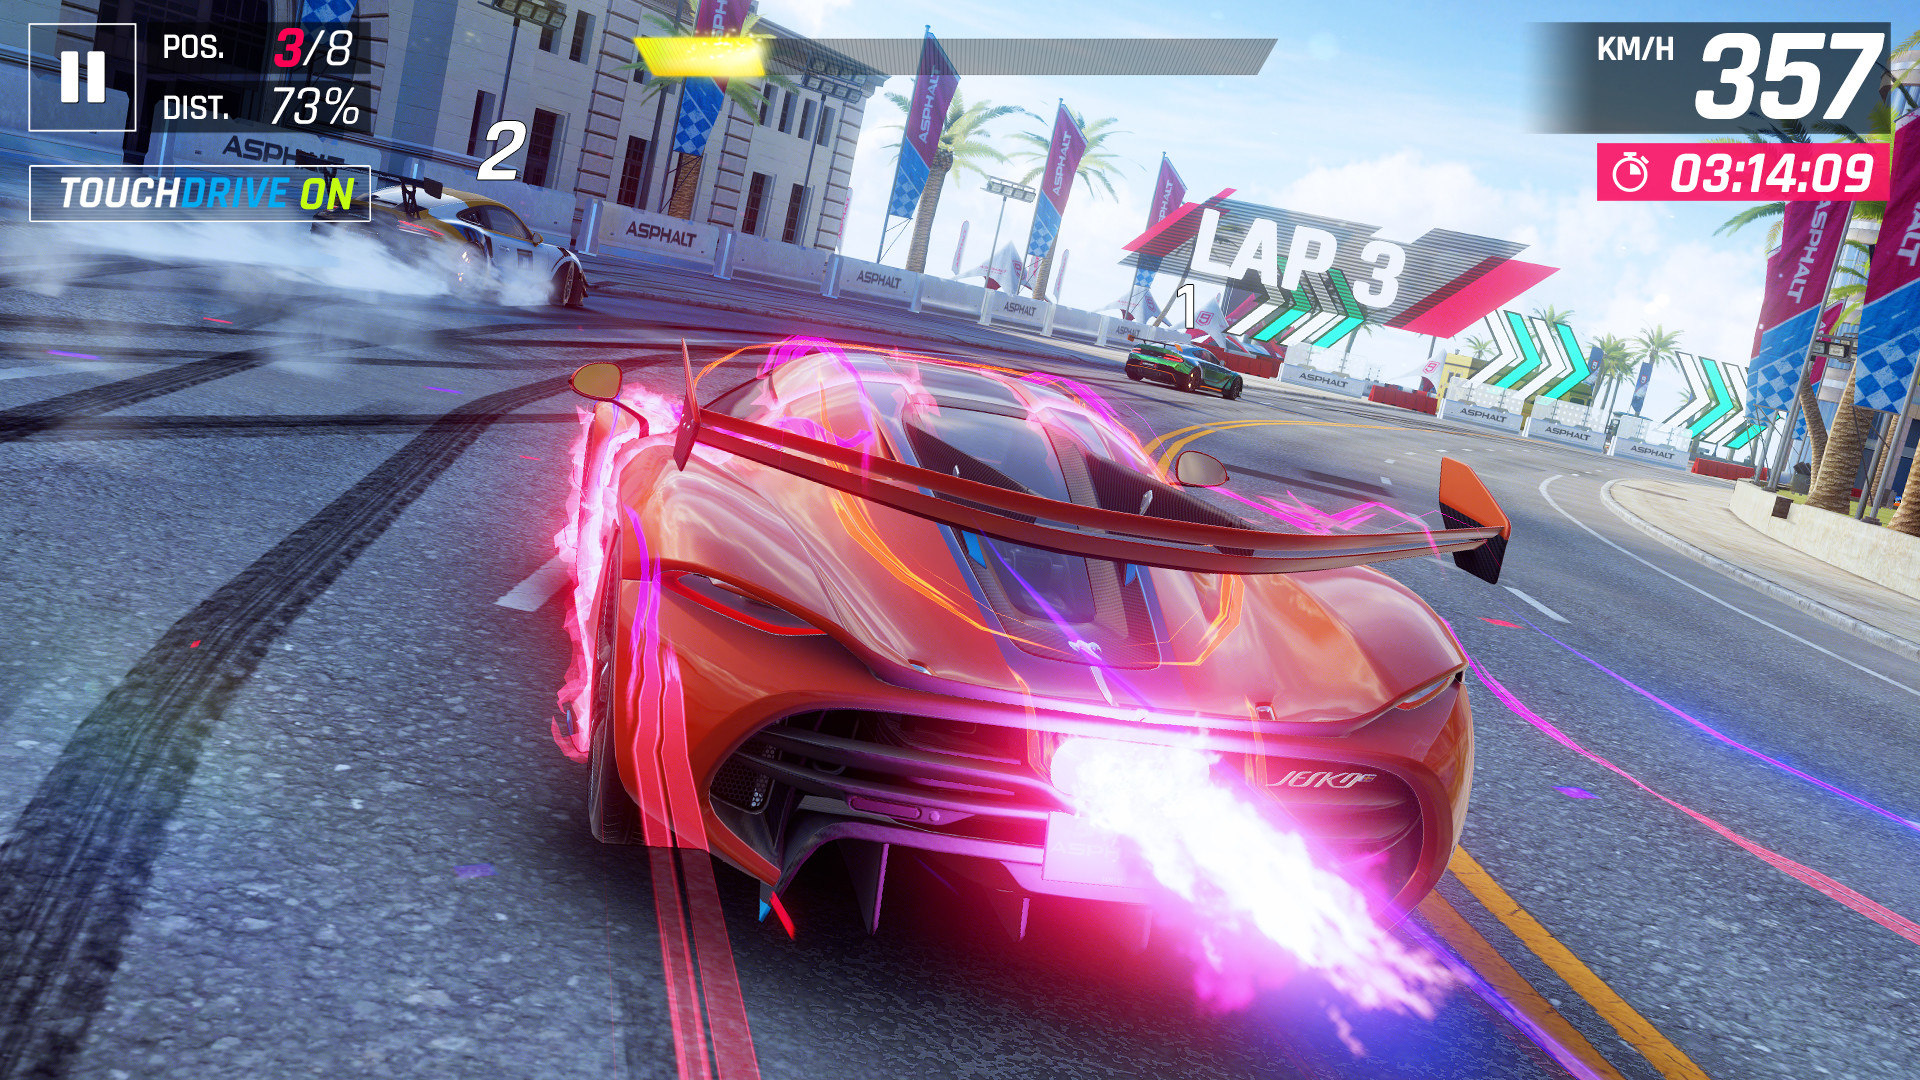 Free-to-play racing game Asphalt 9: Legends coming to PC this year